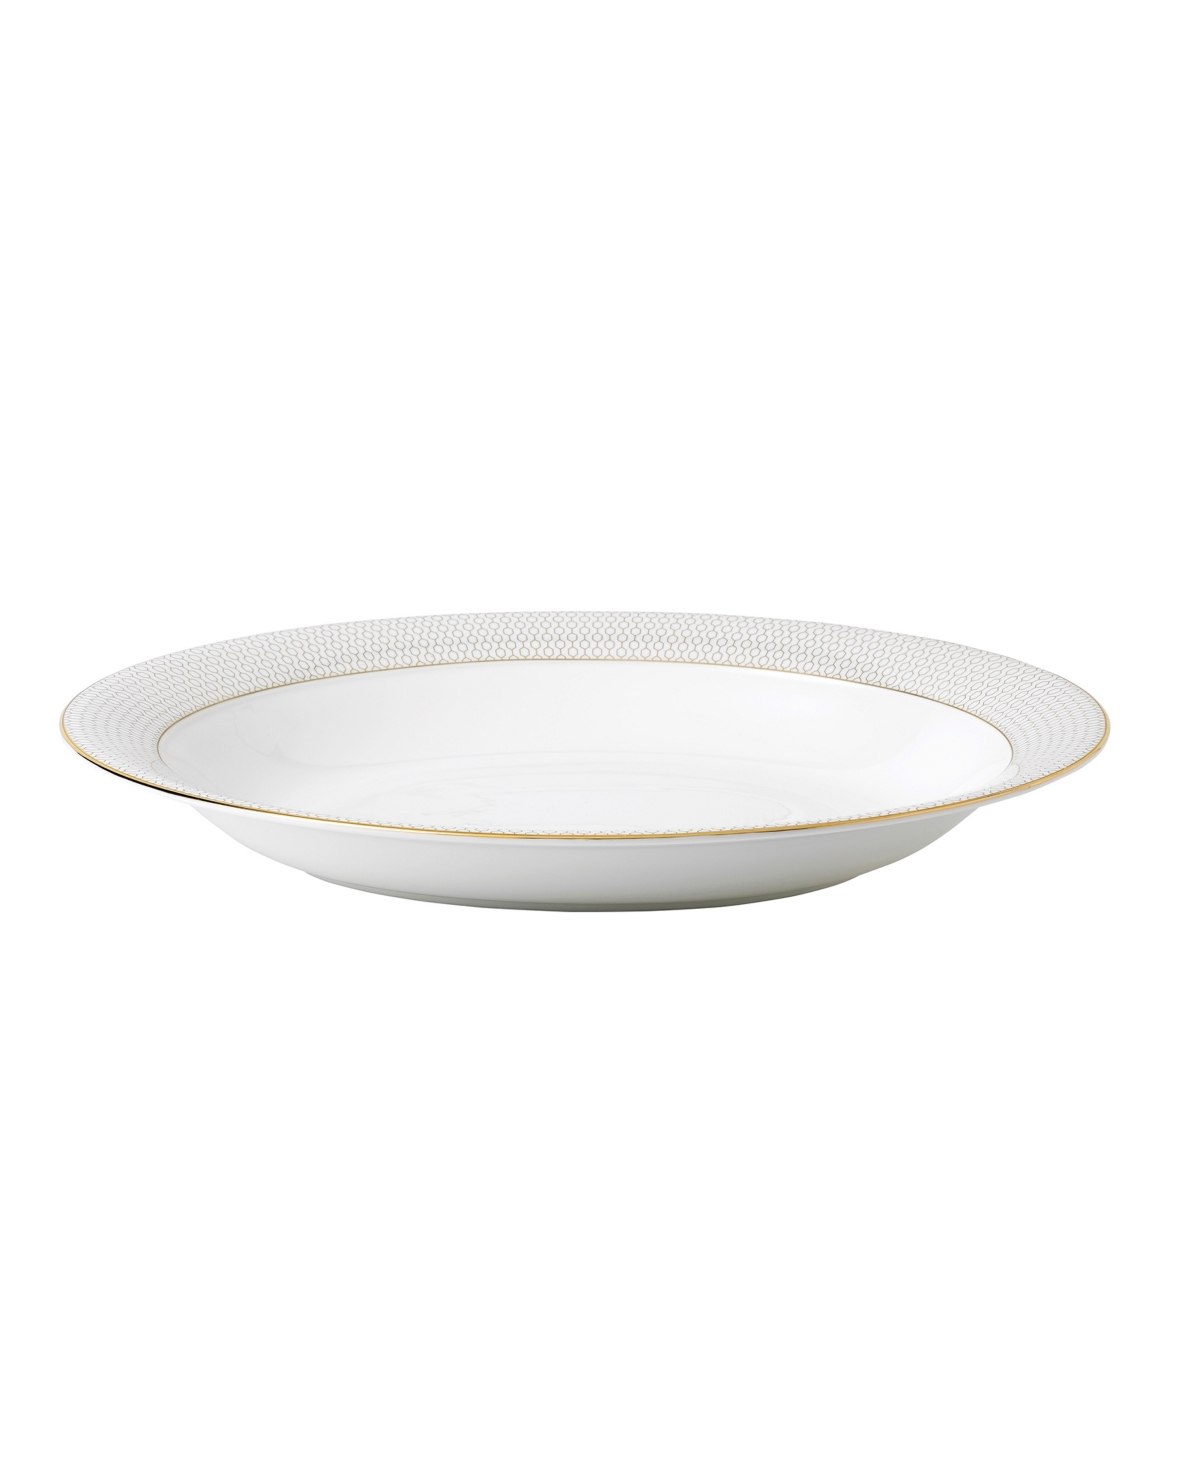 Wedgwood Gio Gold Oval Open Vegetable Dish 27.3 oz